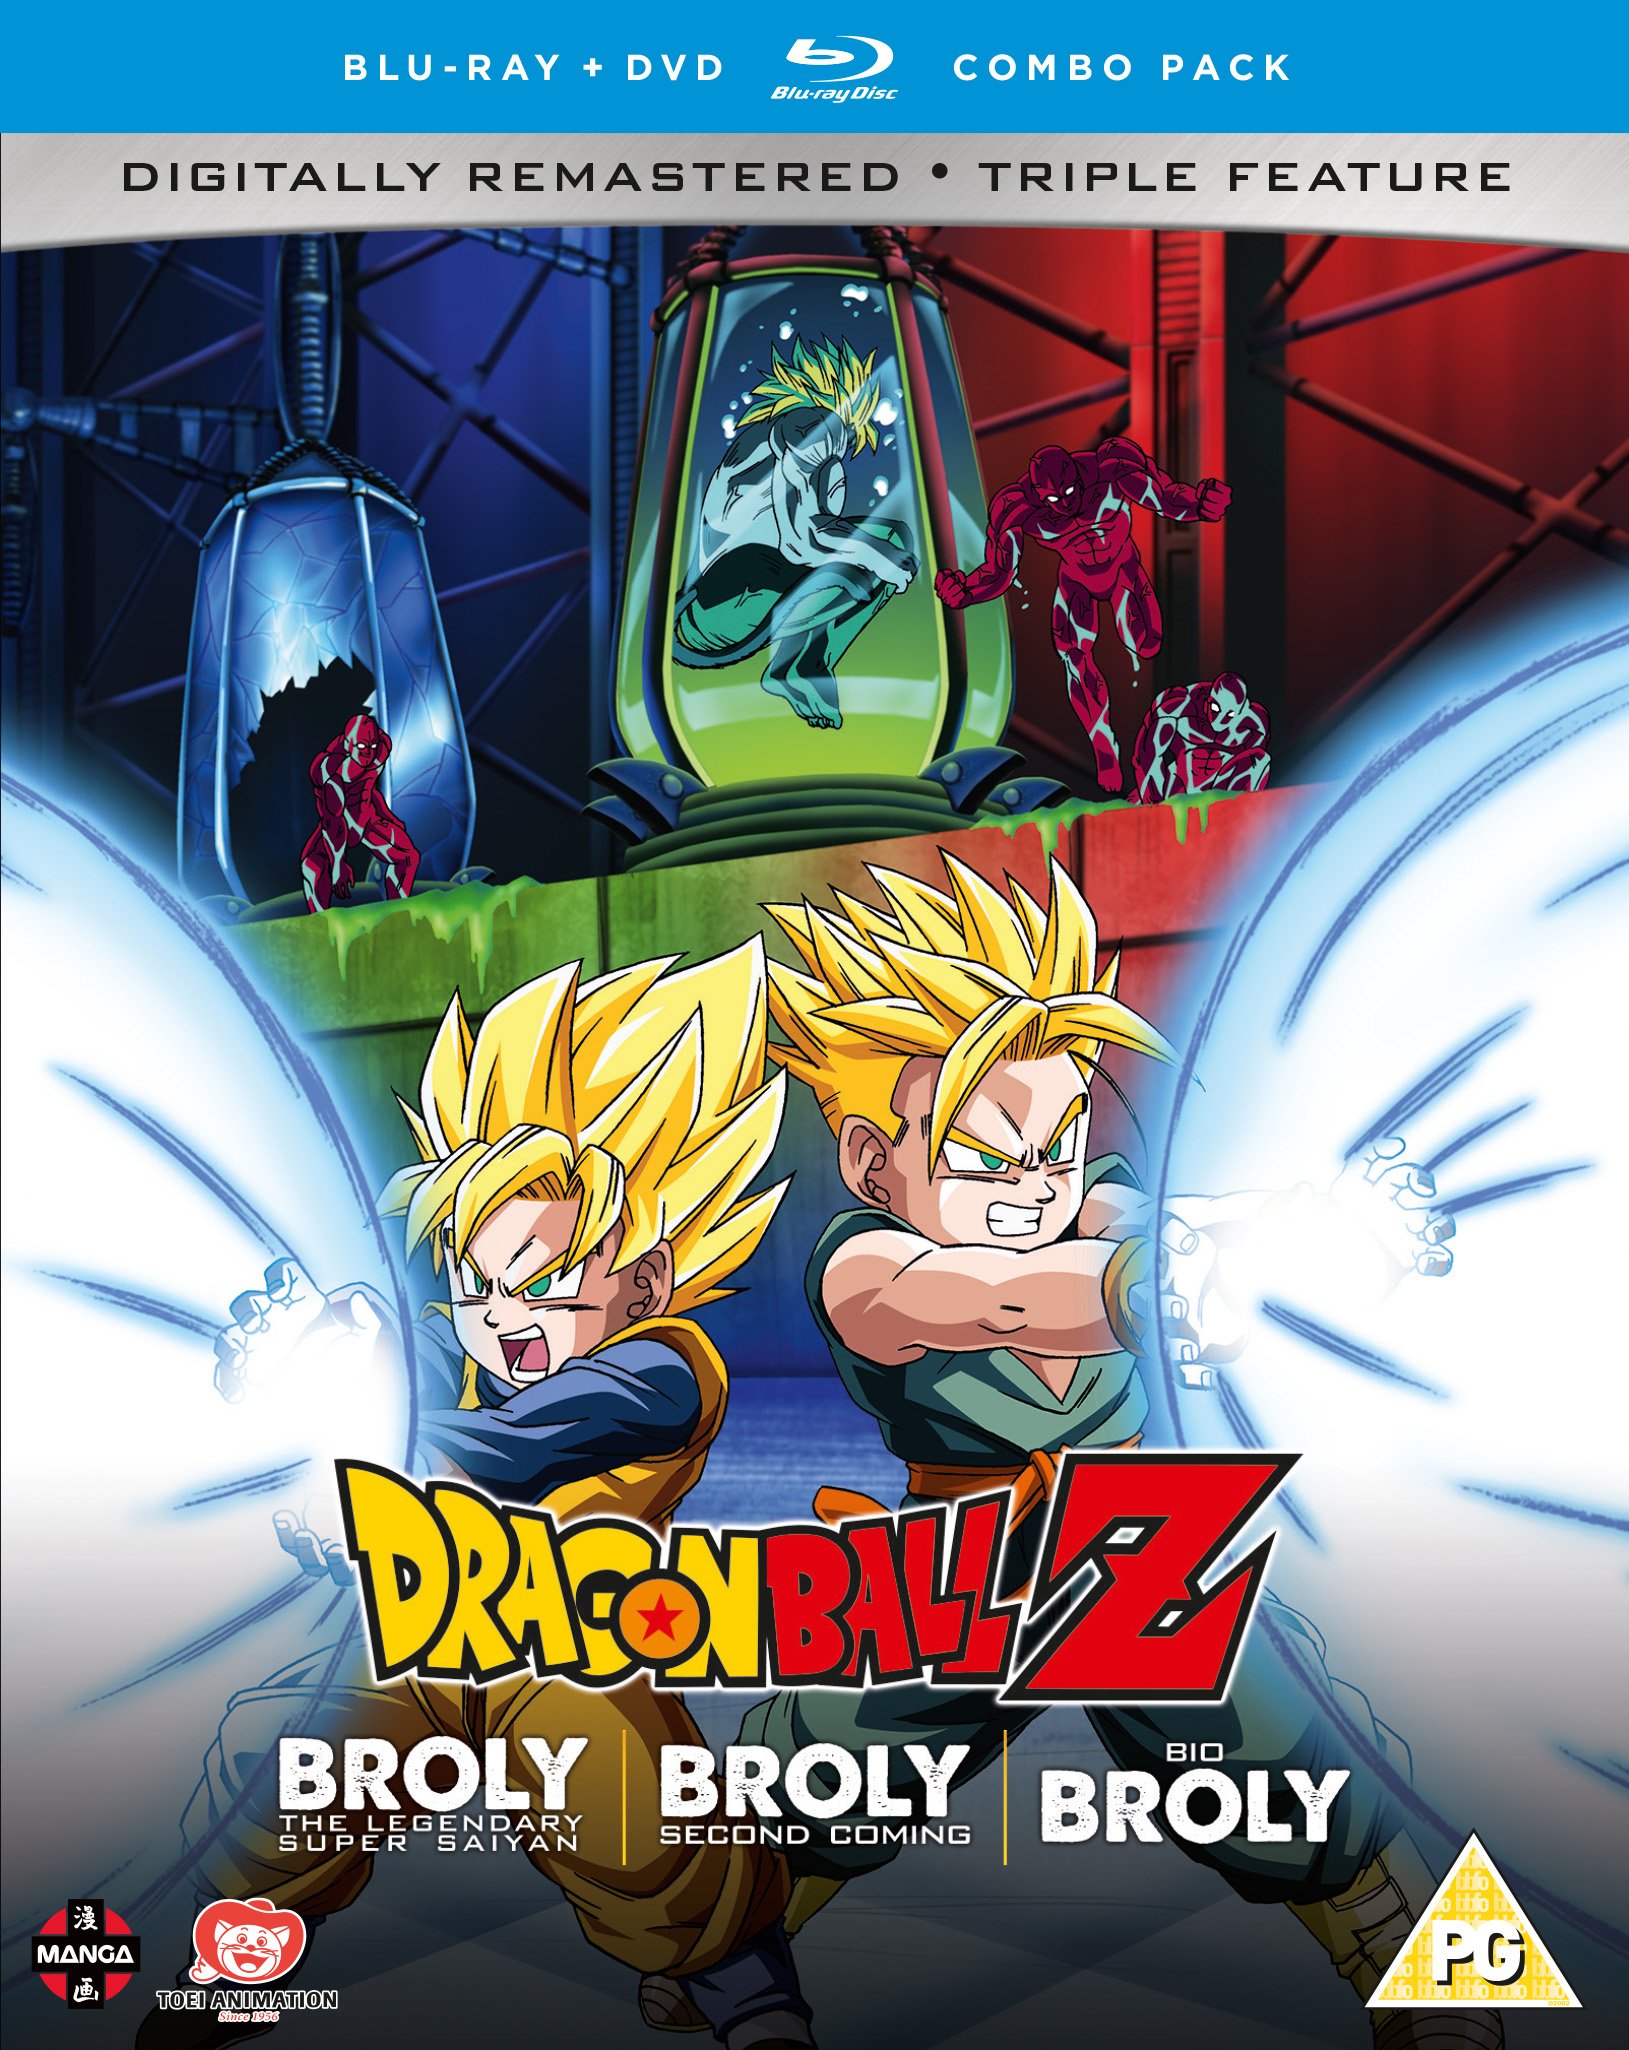 Characters appearing in Dragon Ball Z Movie 11: Bio-Broly Anime